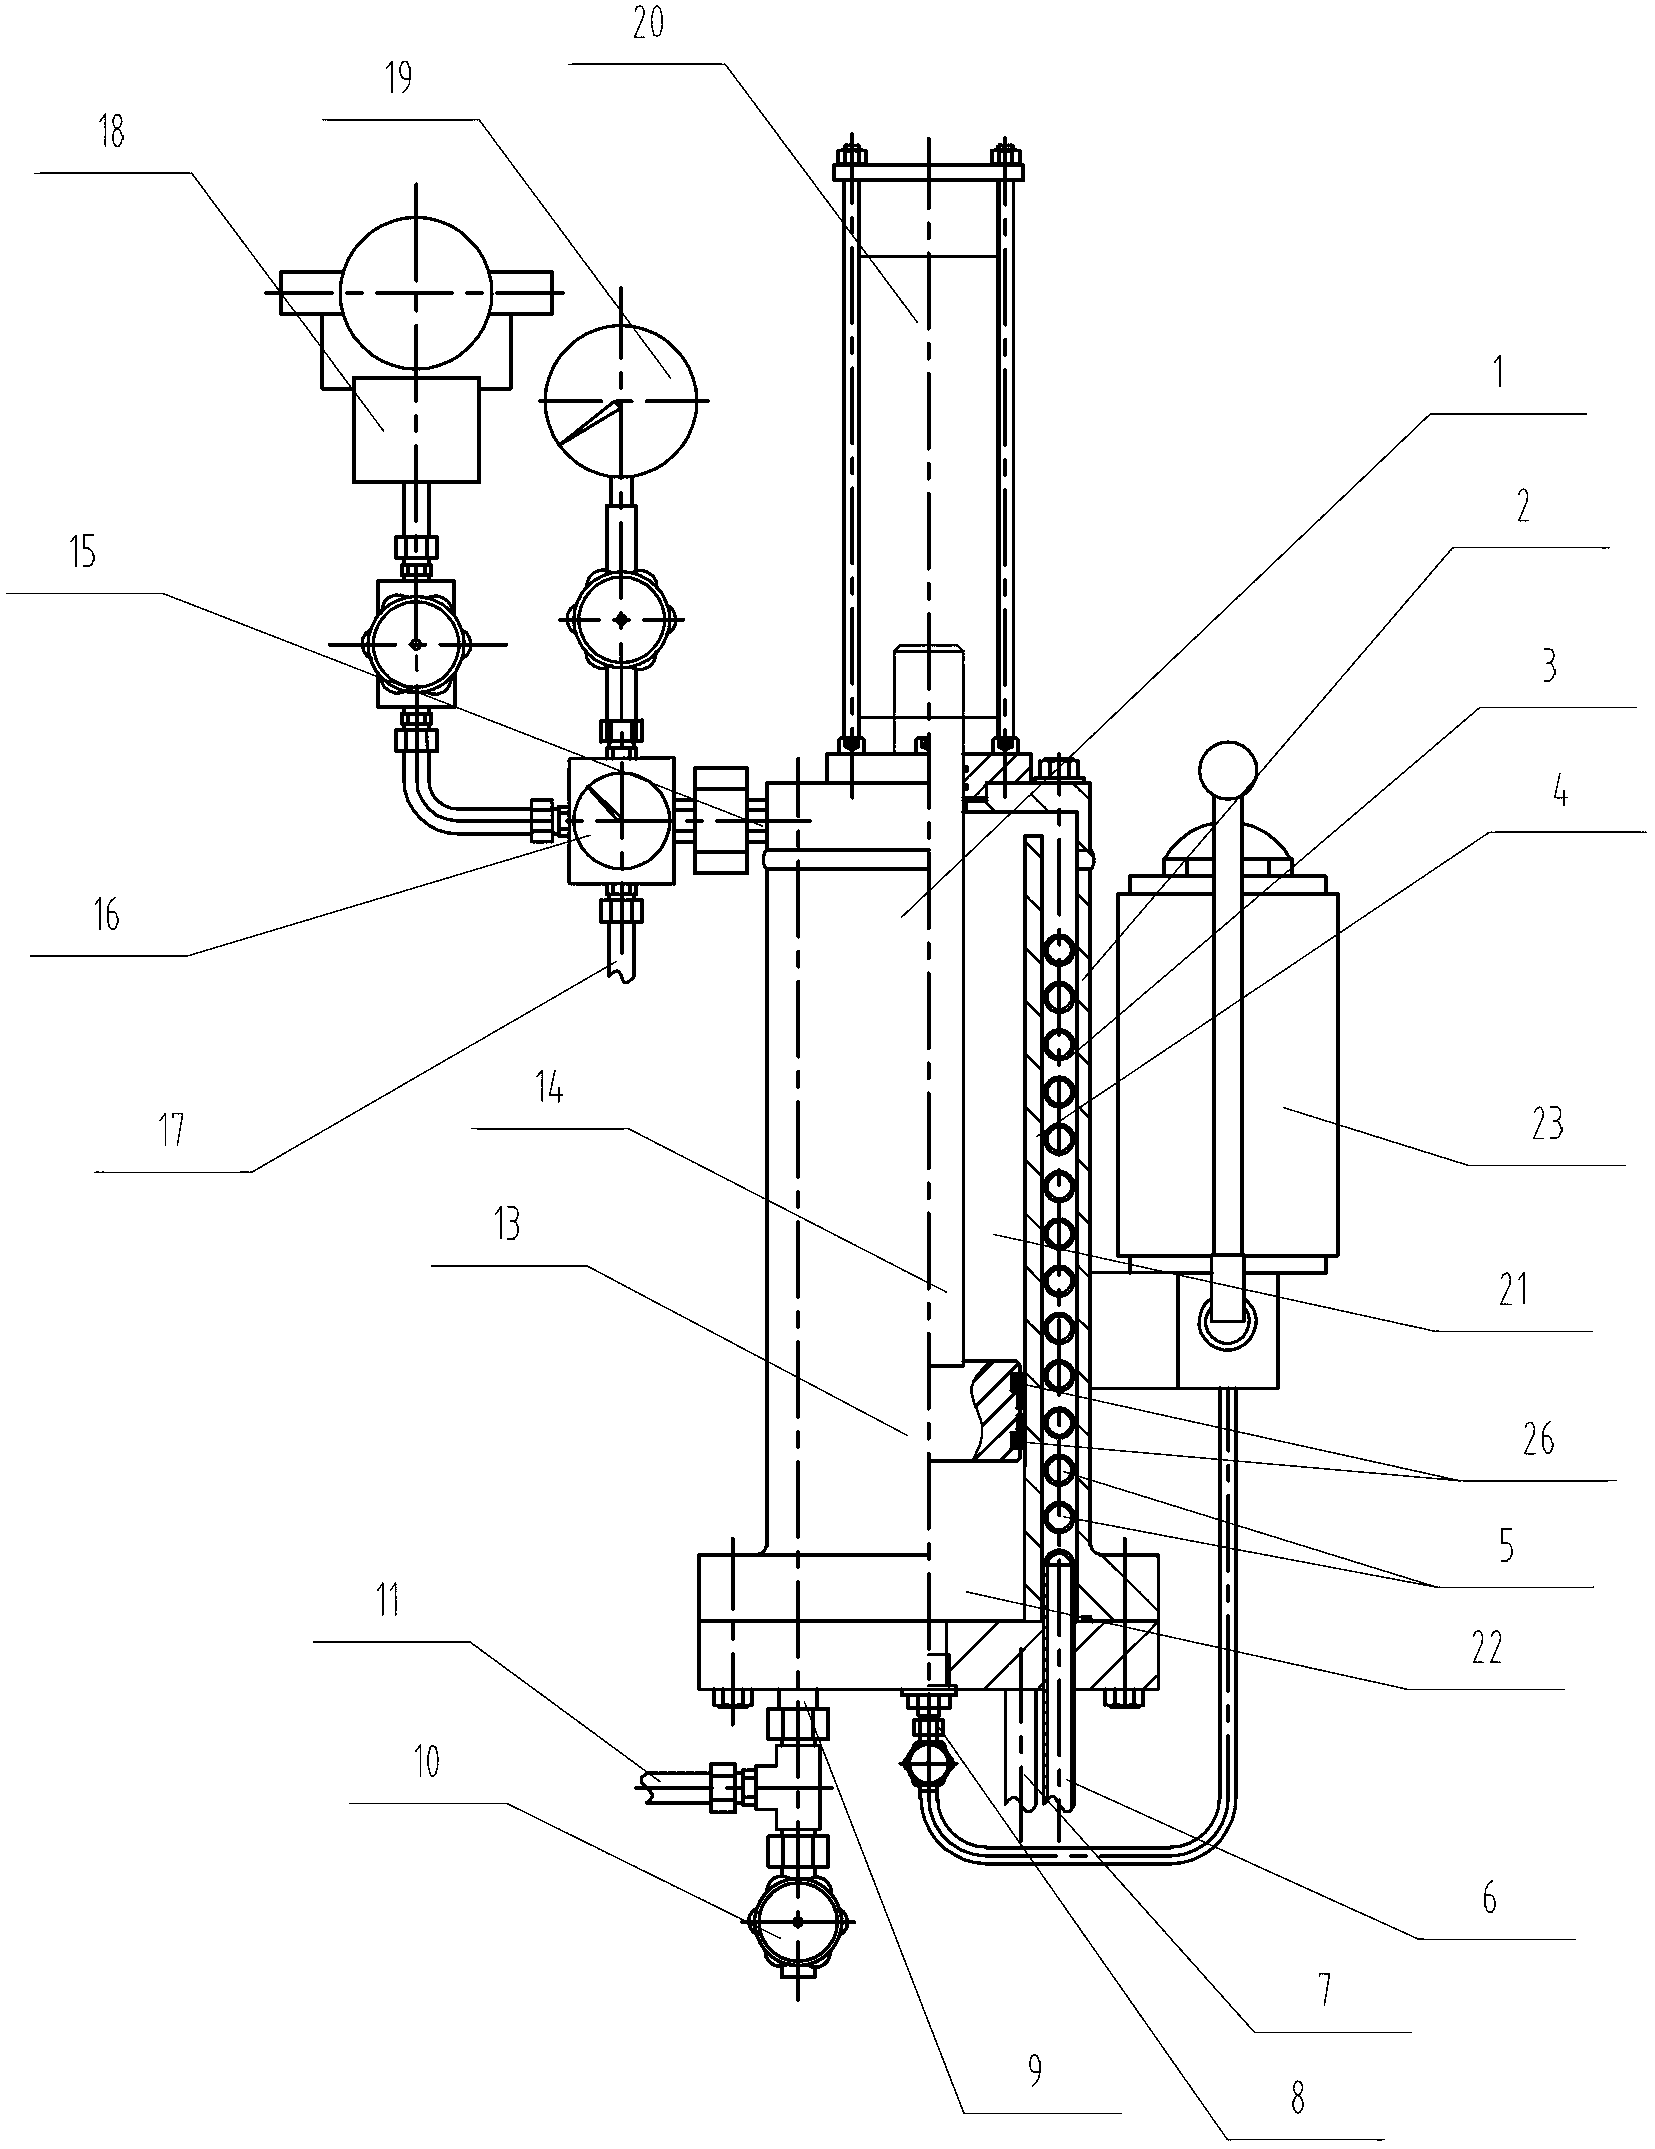 Spacer fluid circulating system used for mechanical seal